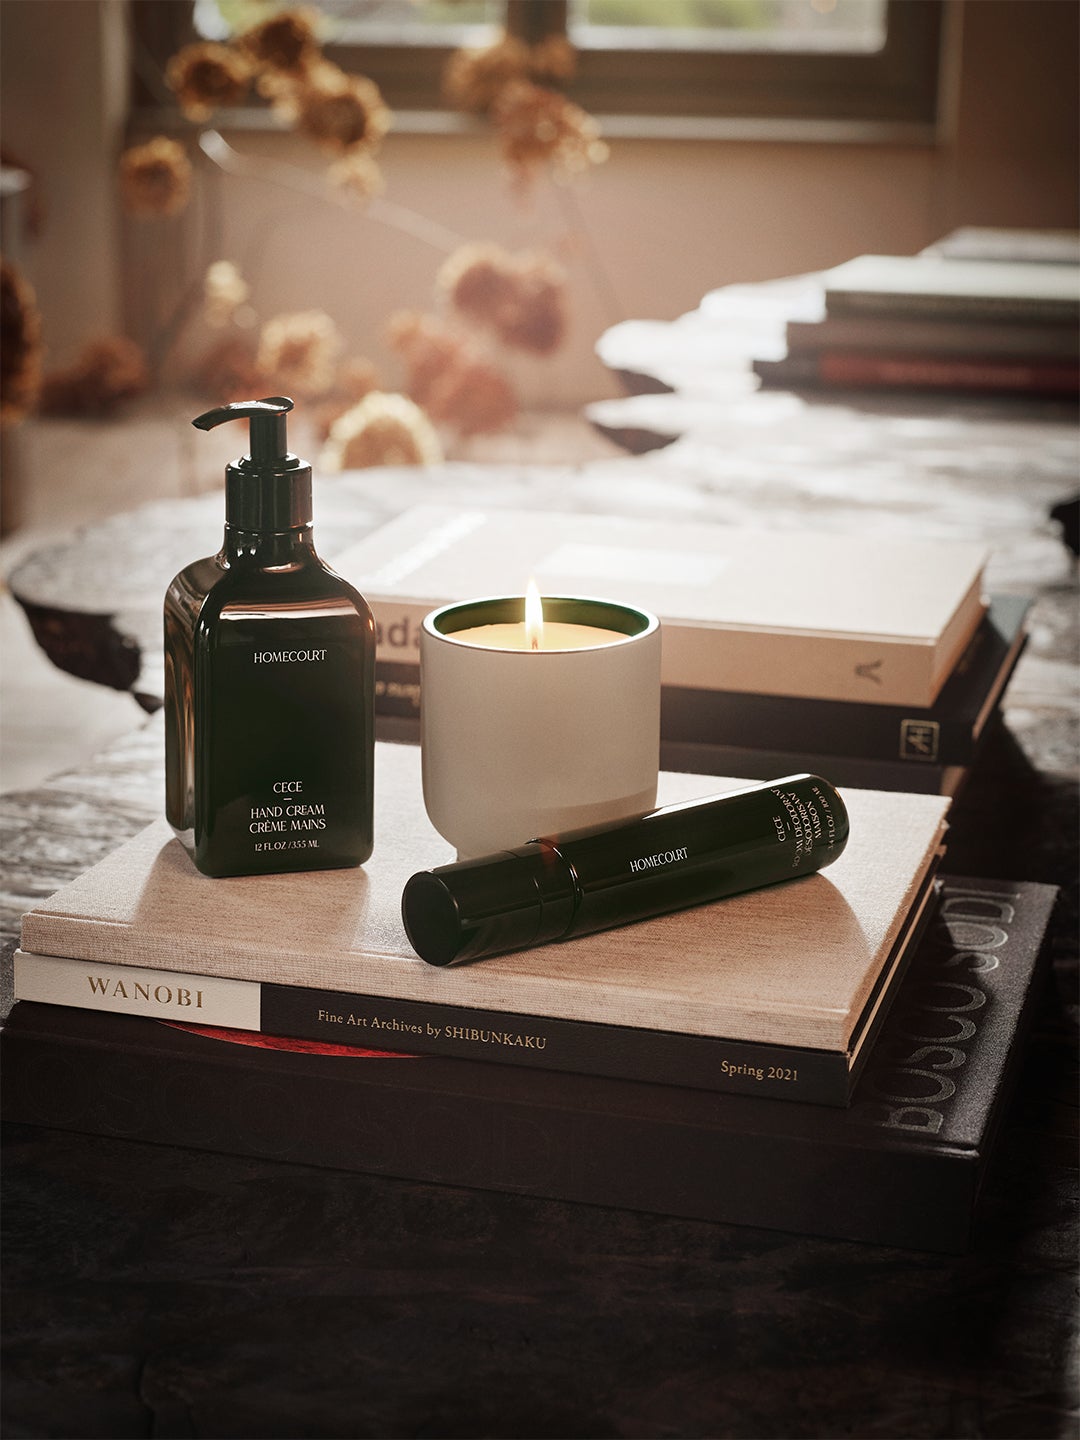 Soap, candle, and room deodorant by Homecourt